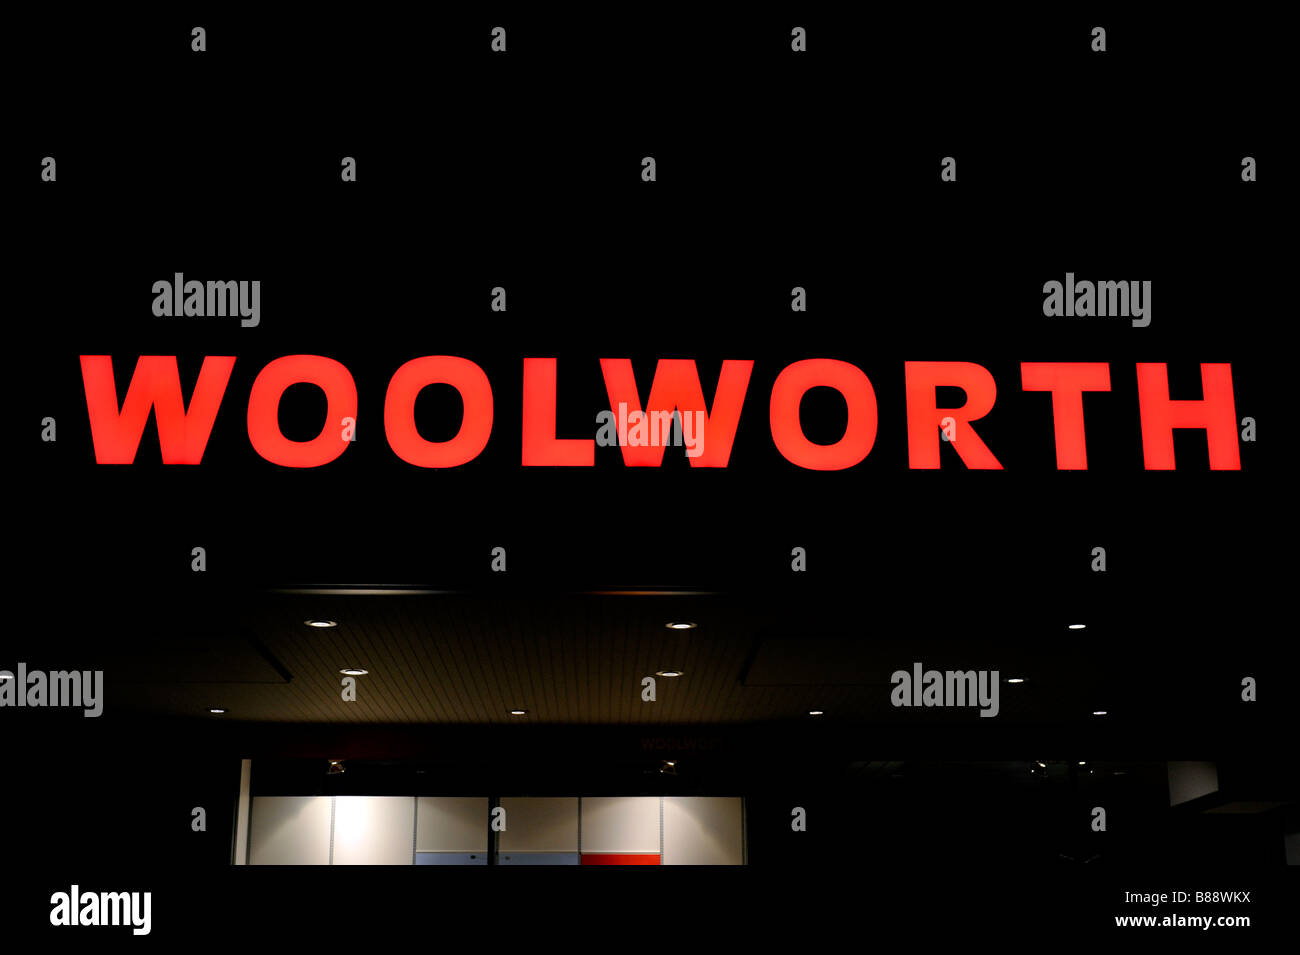 woolworth neon sign woolies department store closed credit crunch out of business Stock Photo